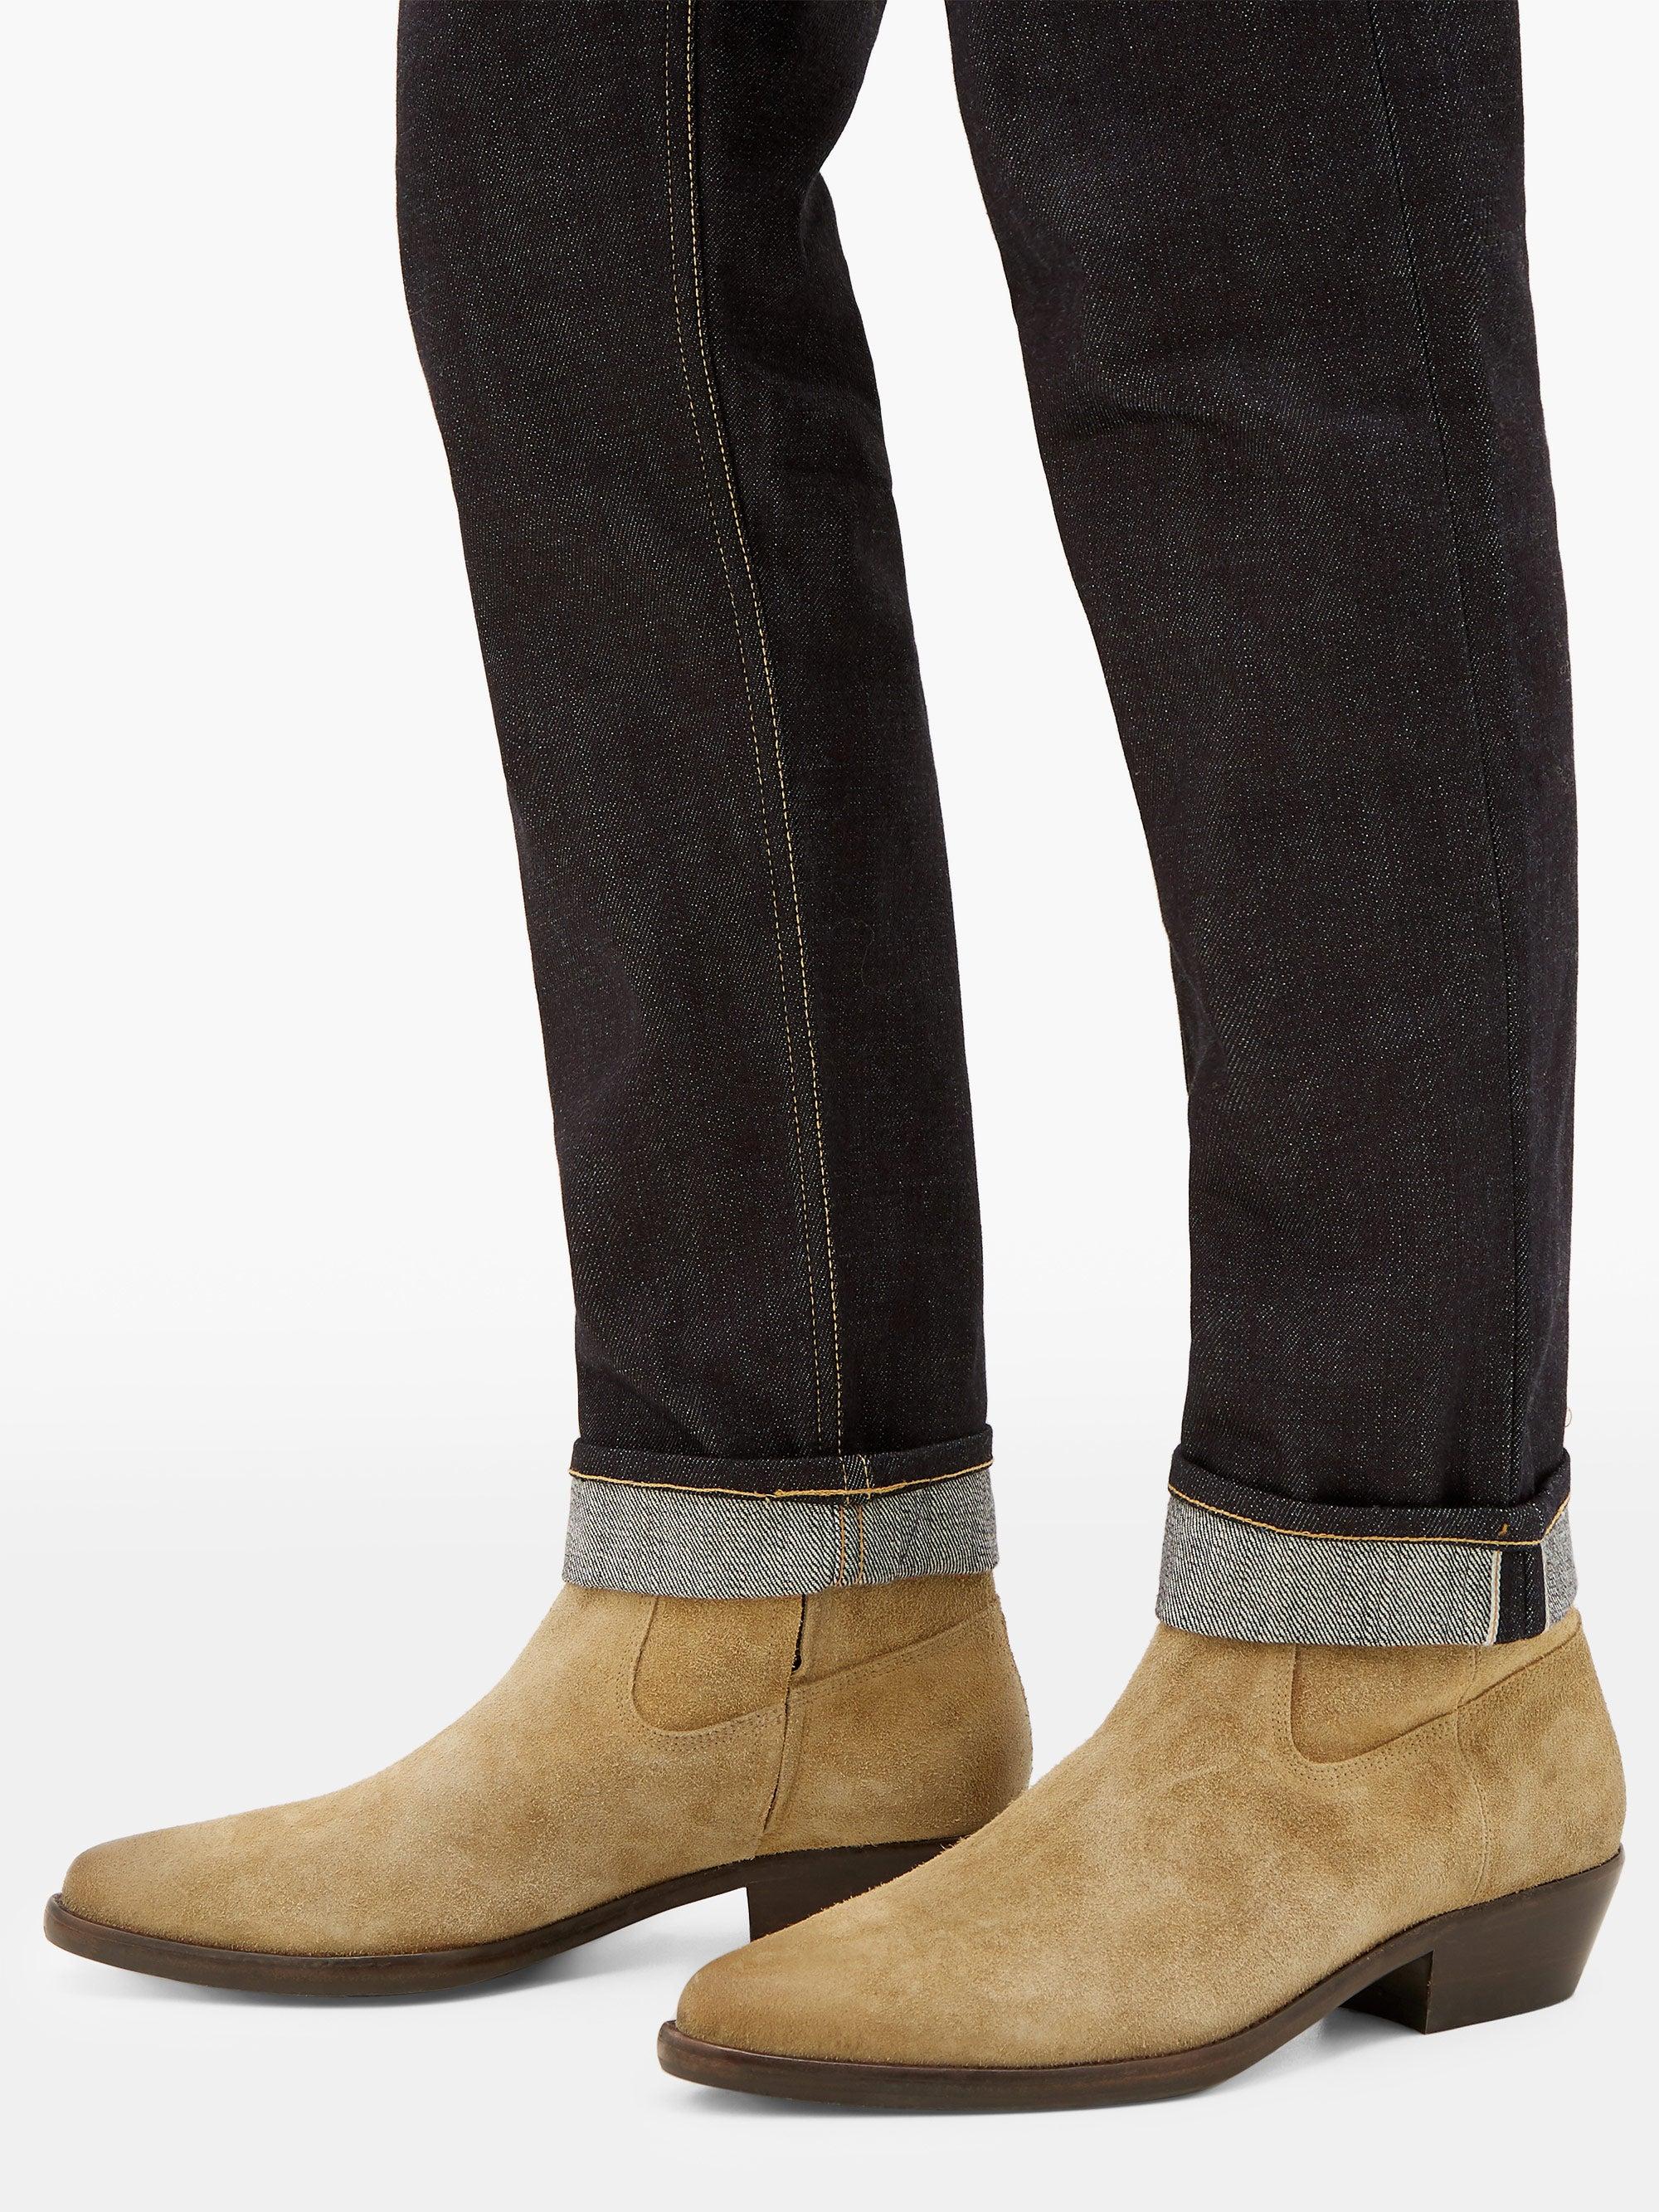 Isabel Marant Diago Suede Western Boots in Beige (Natural) for Men - Lyst